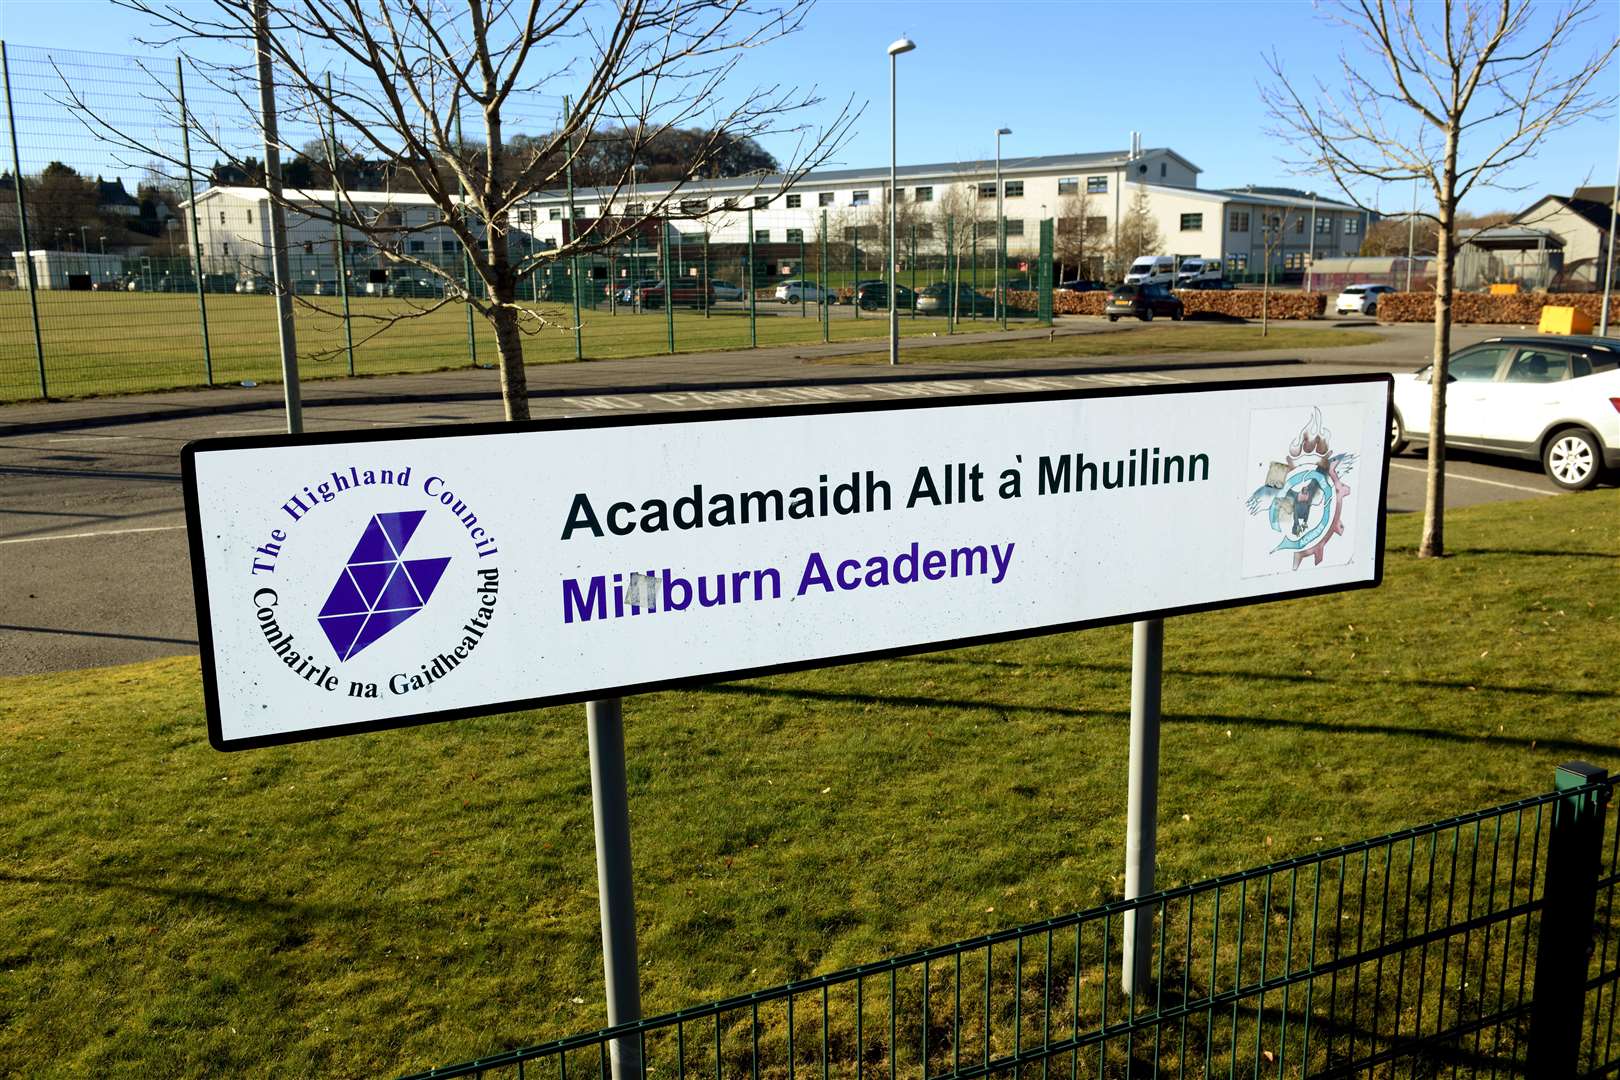 Cradlehall Primary's football team pay a fee for access to an all-weather pitch at Millburn Academy.